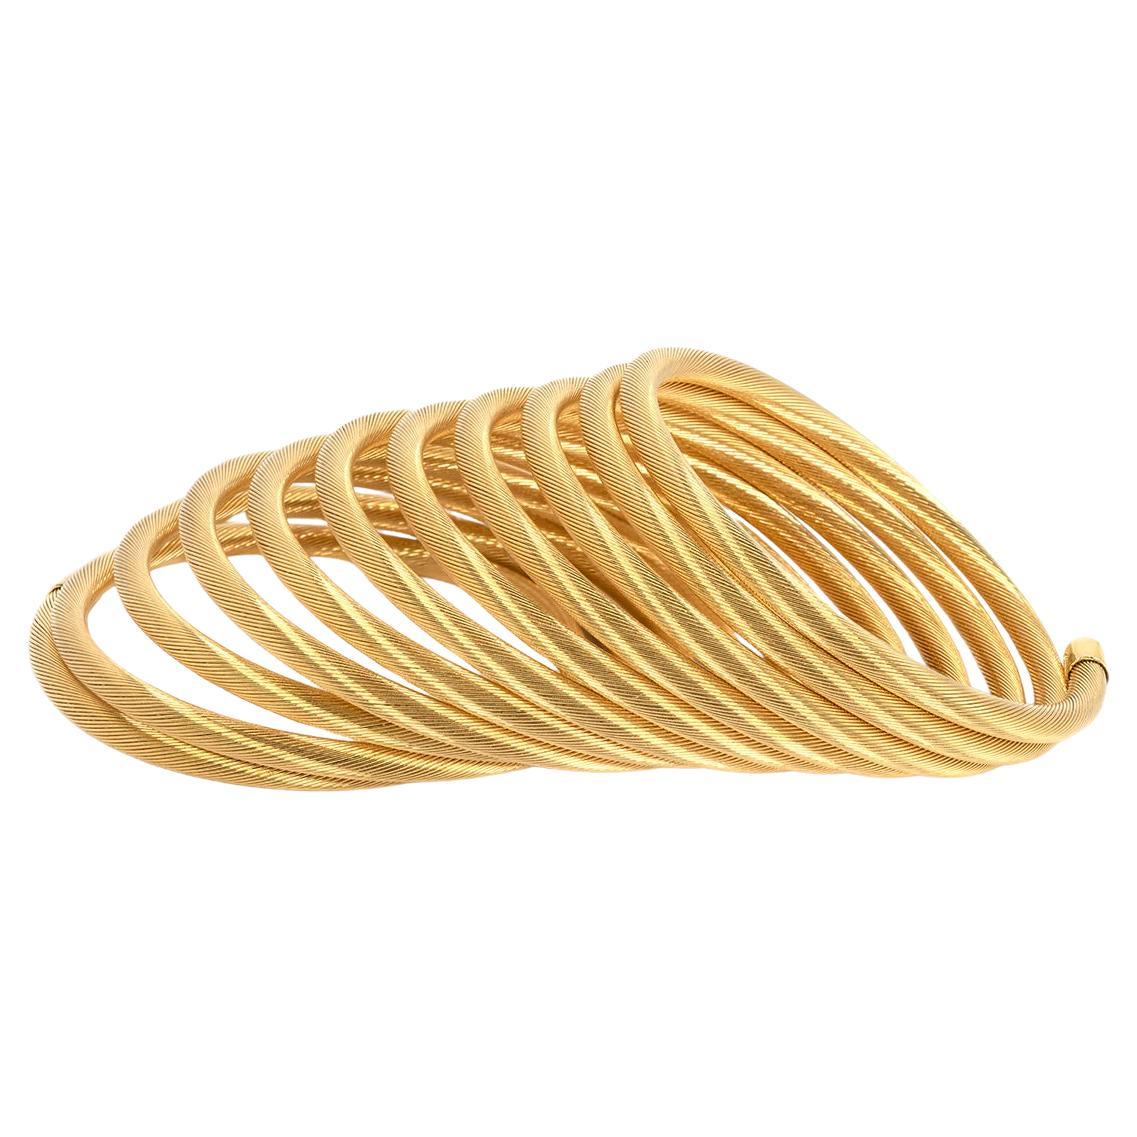 18ct Yellow Gold Coil Bracelet